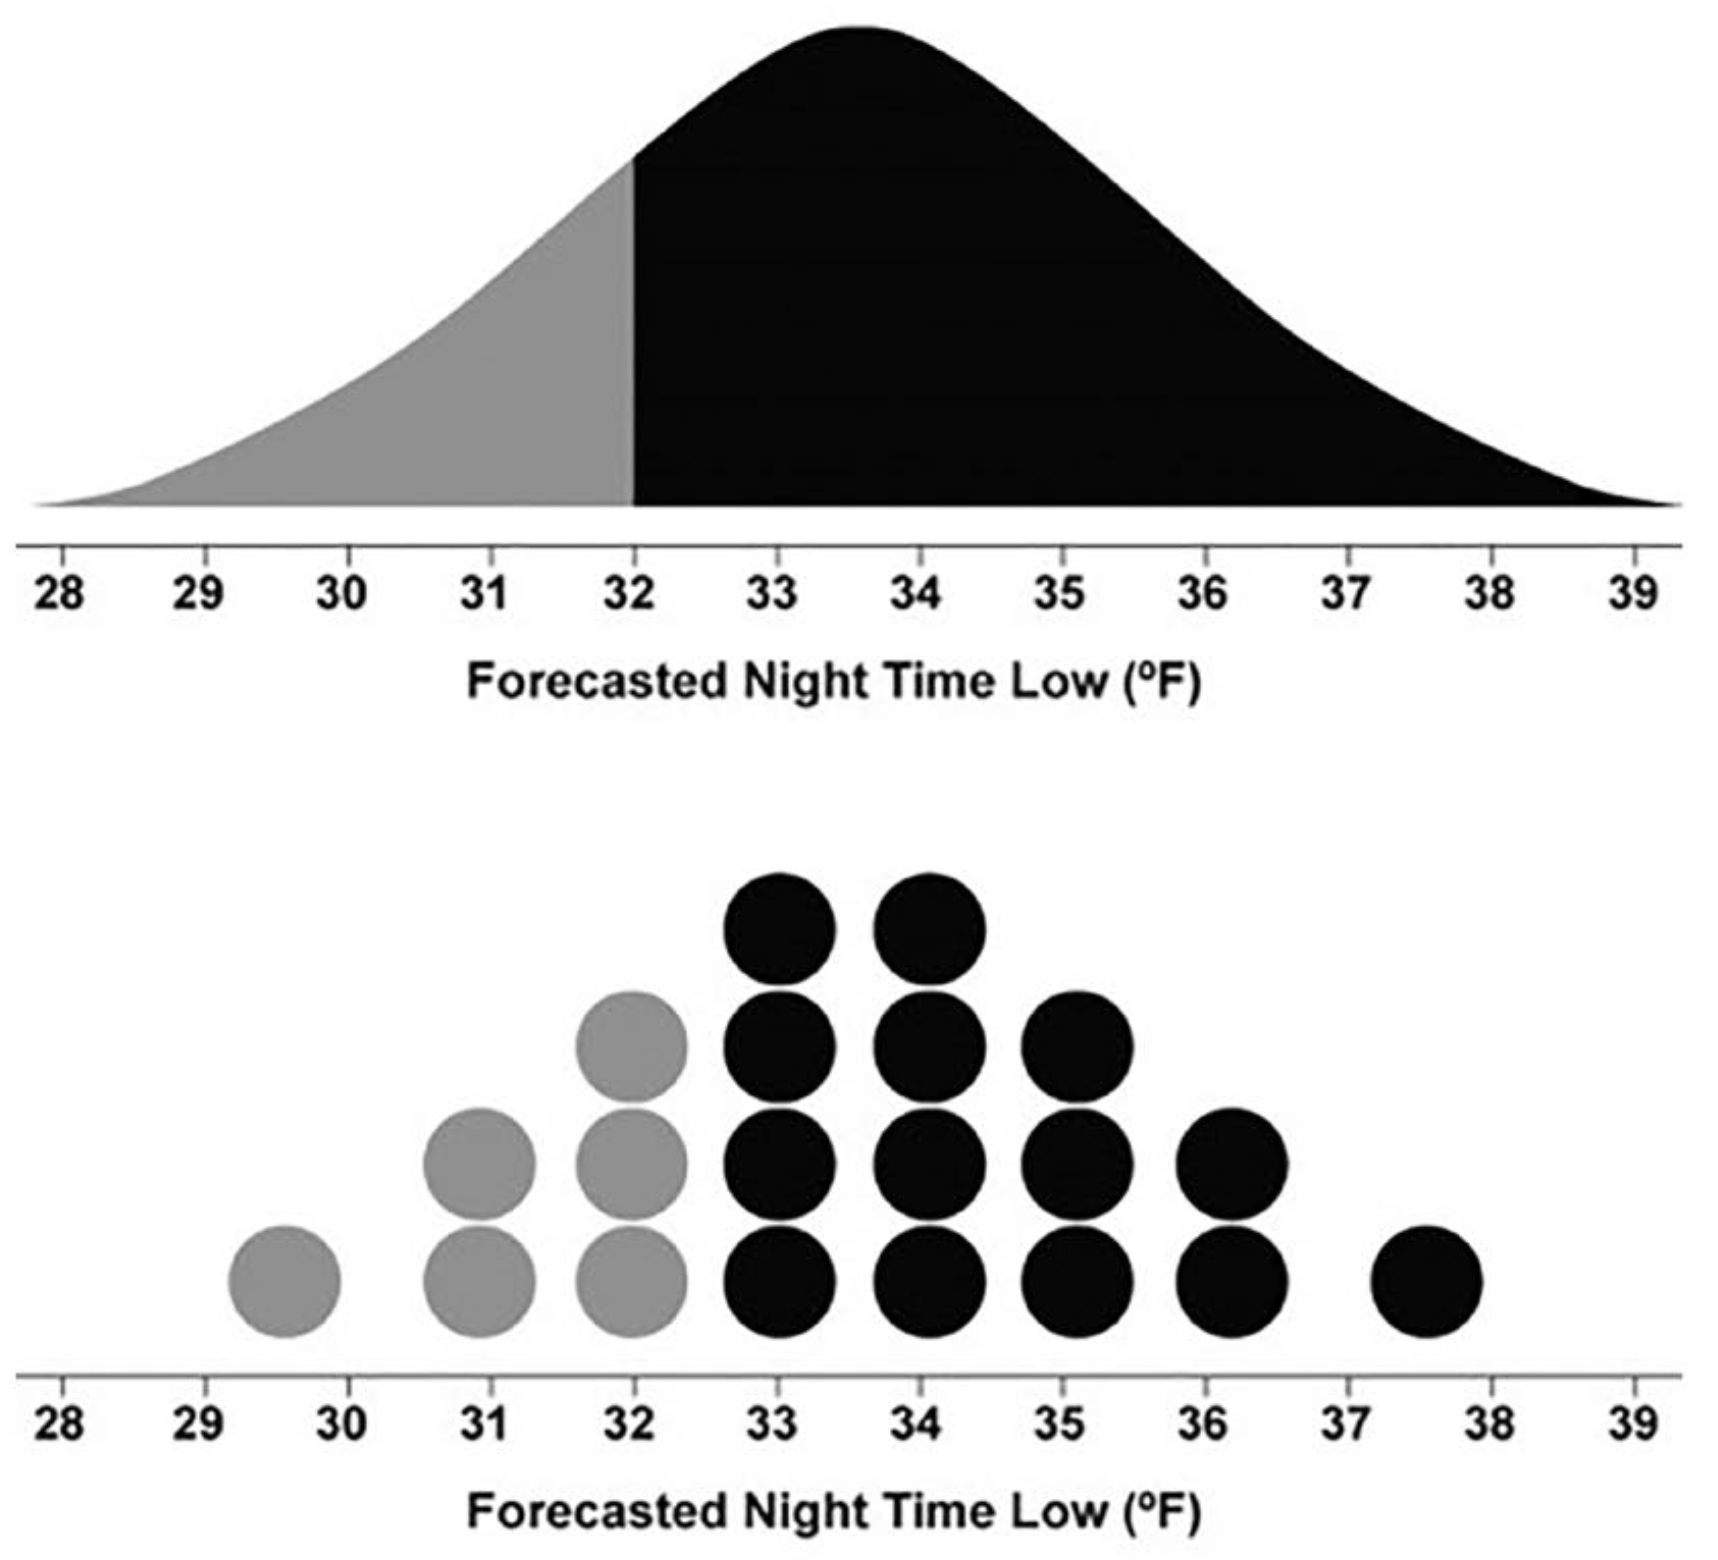 A density plot and a dot plot with 'Forecasted Night Time Low (°F)' on the x axis